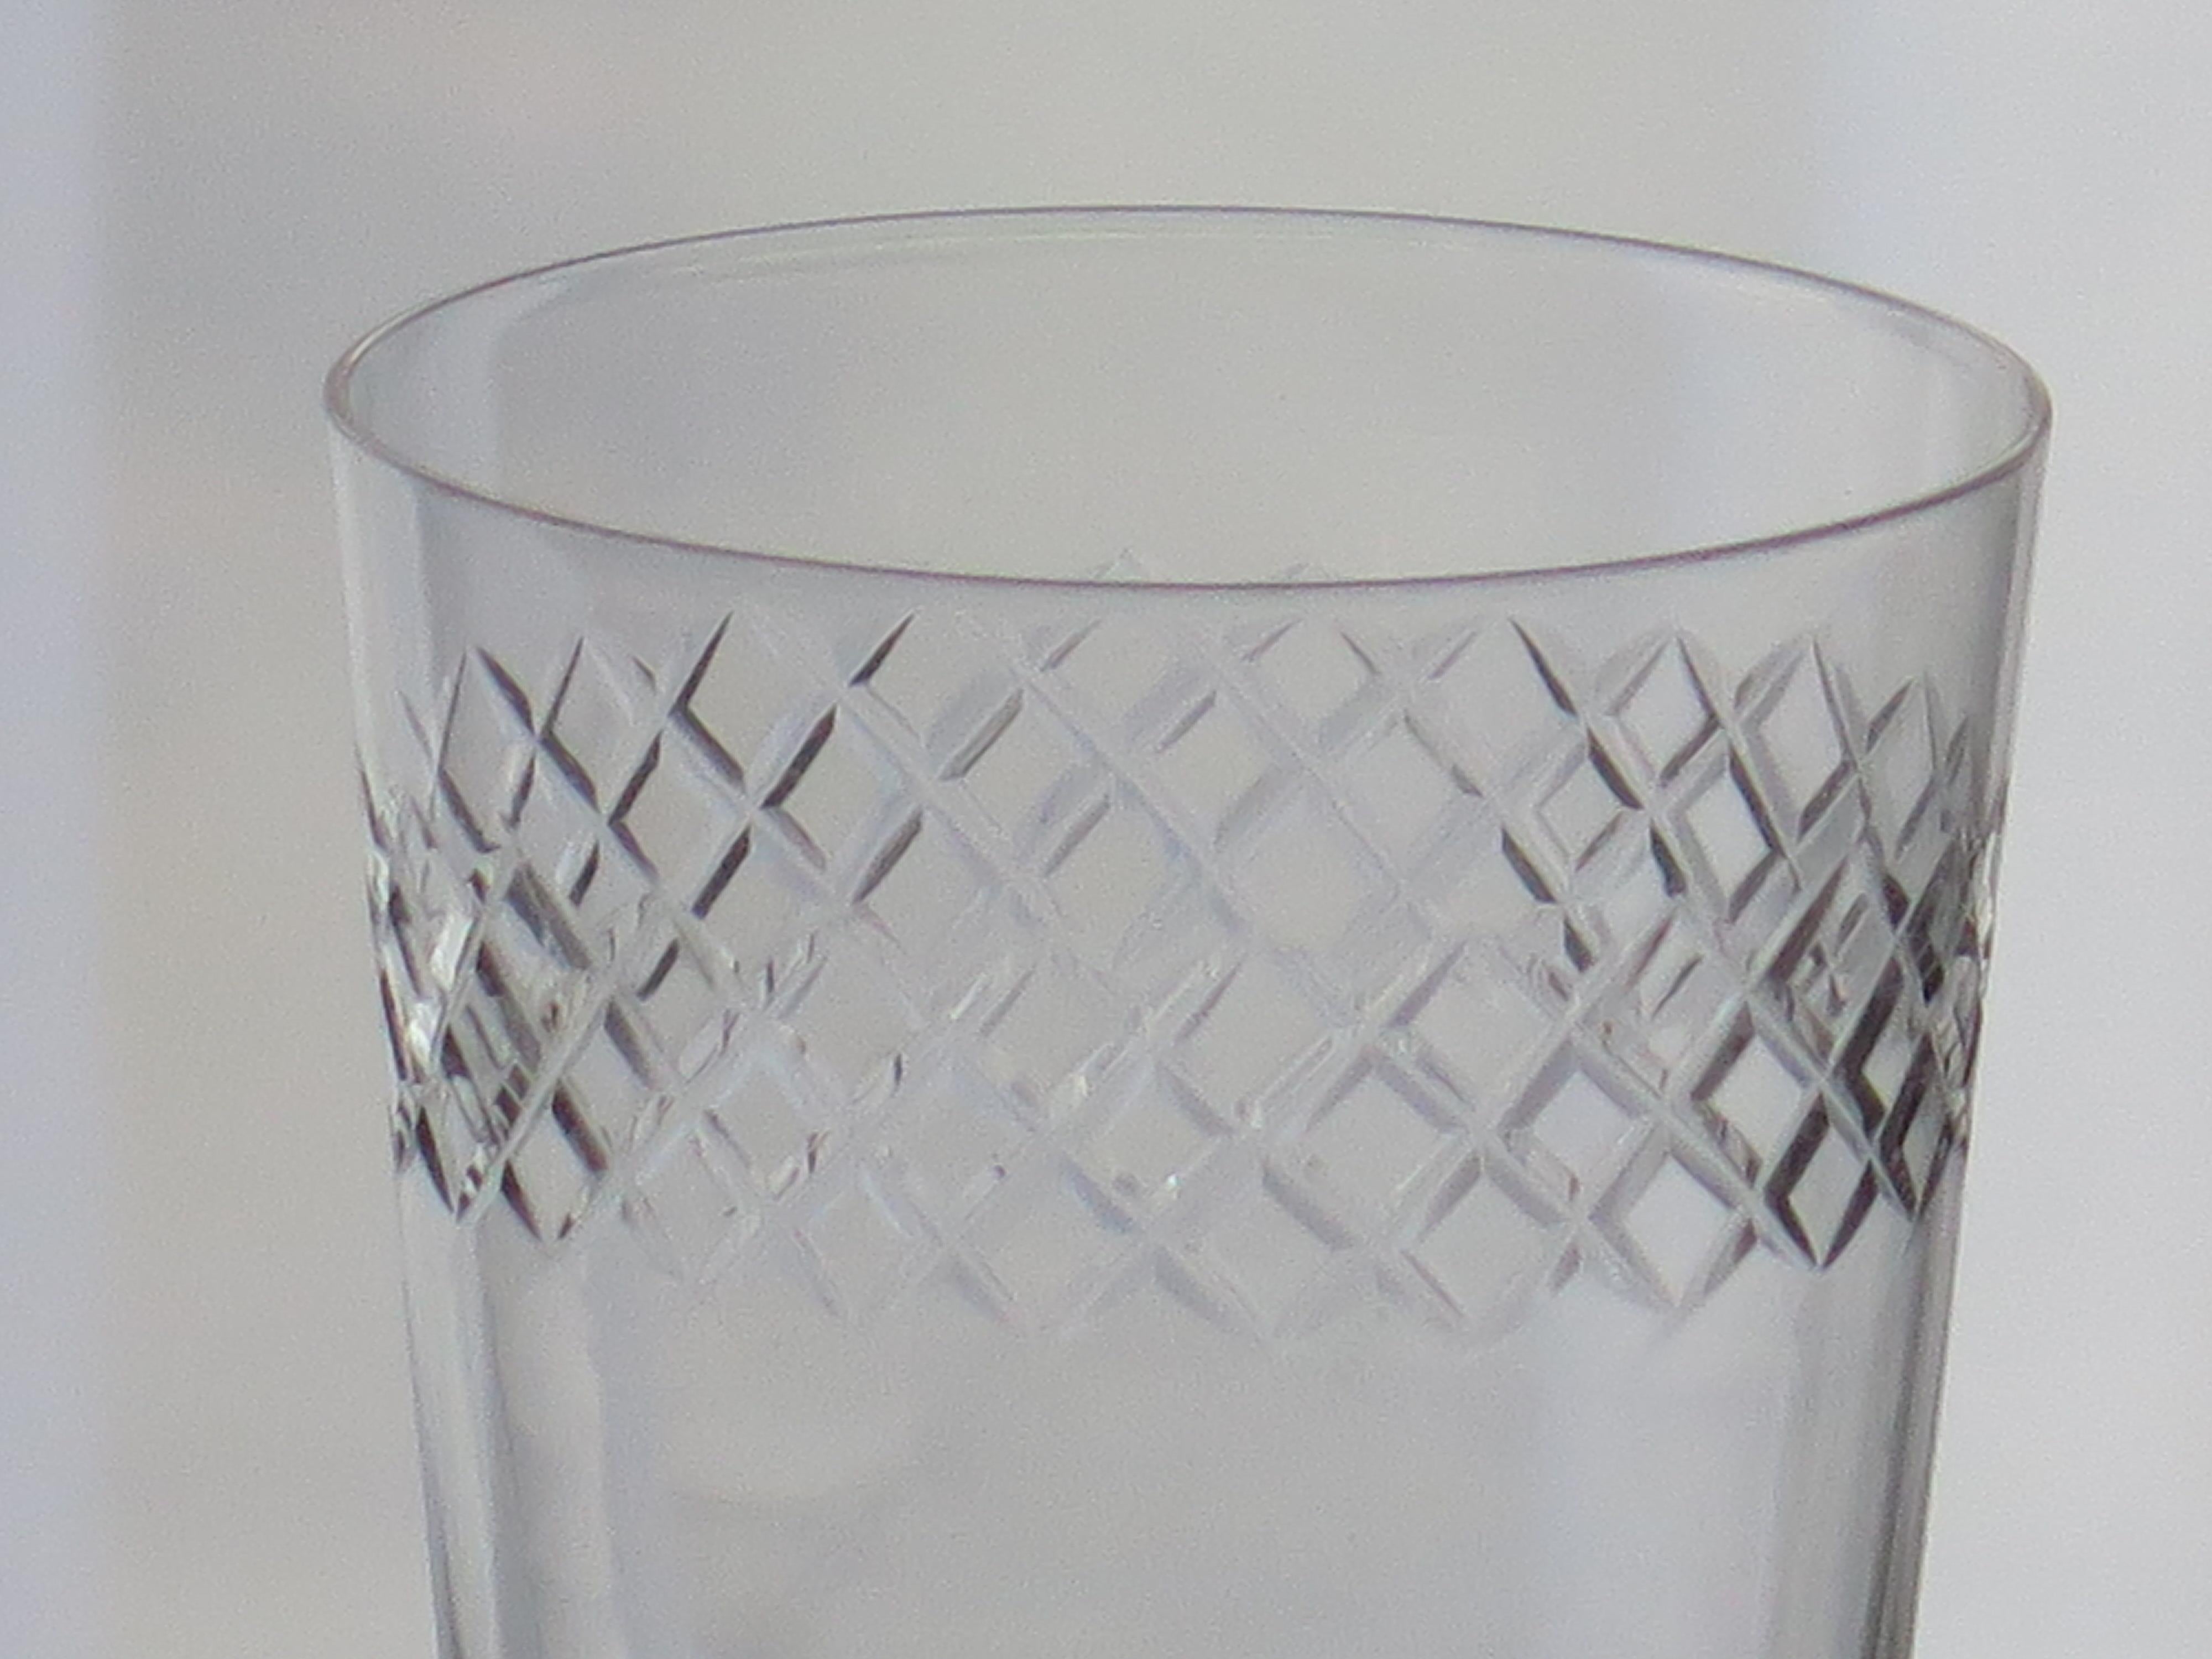 Set of SIX Edwardian Glass Tumblers Engraved Drinking Glasses, circa 1905 For Sale 4